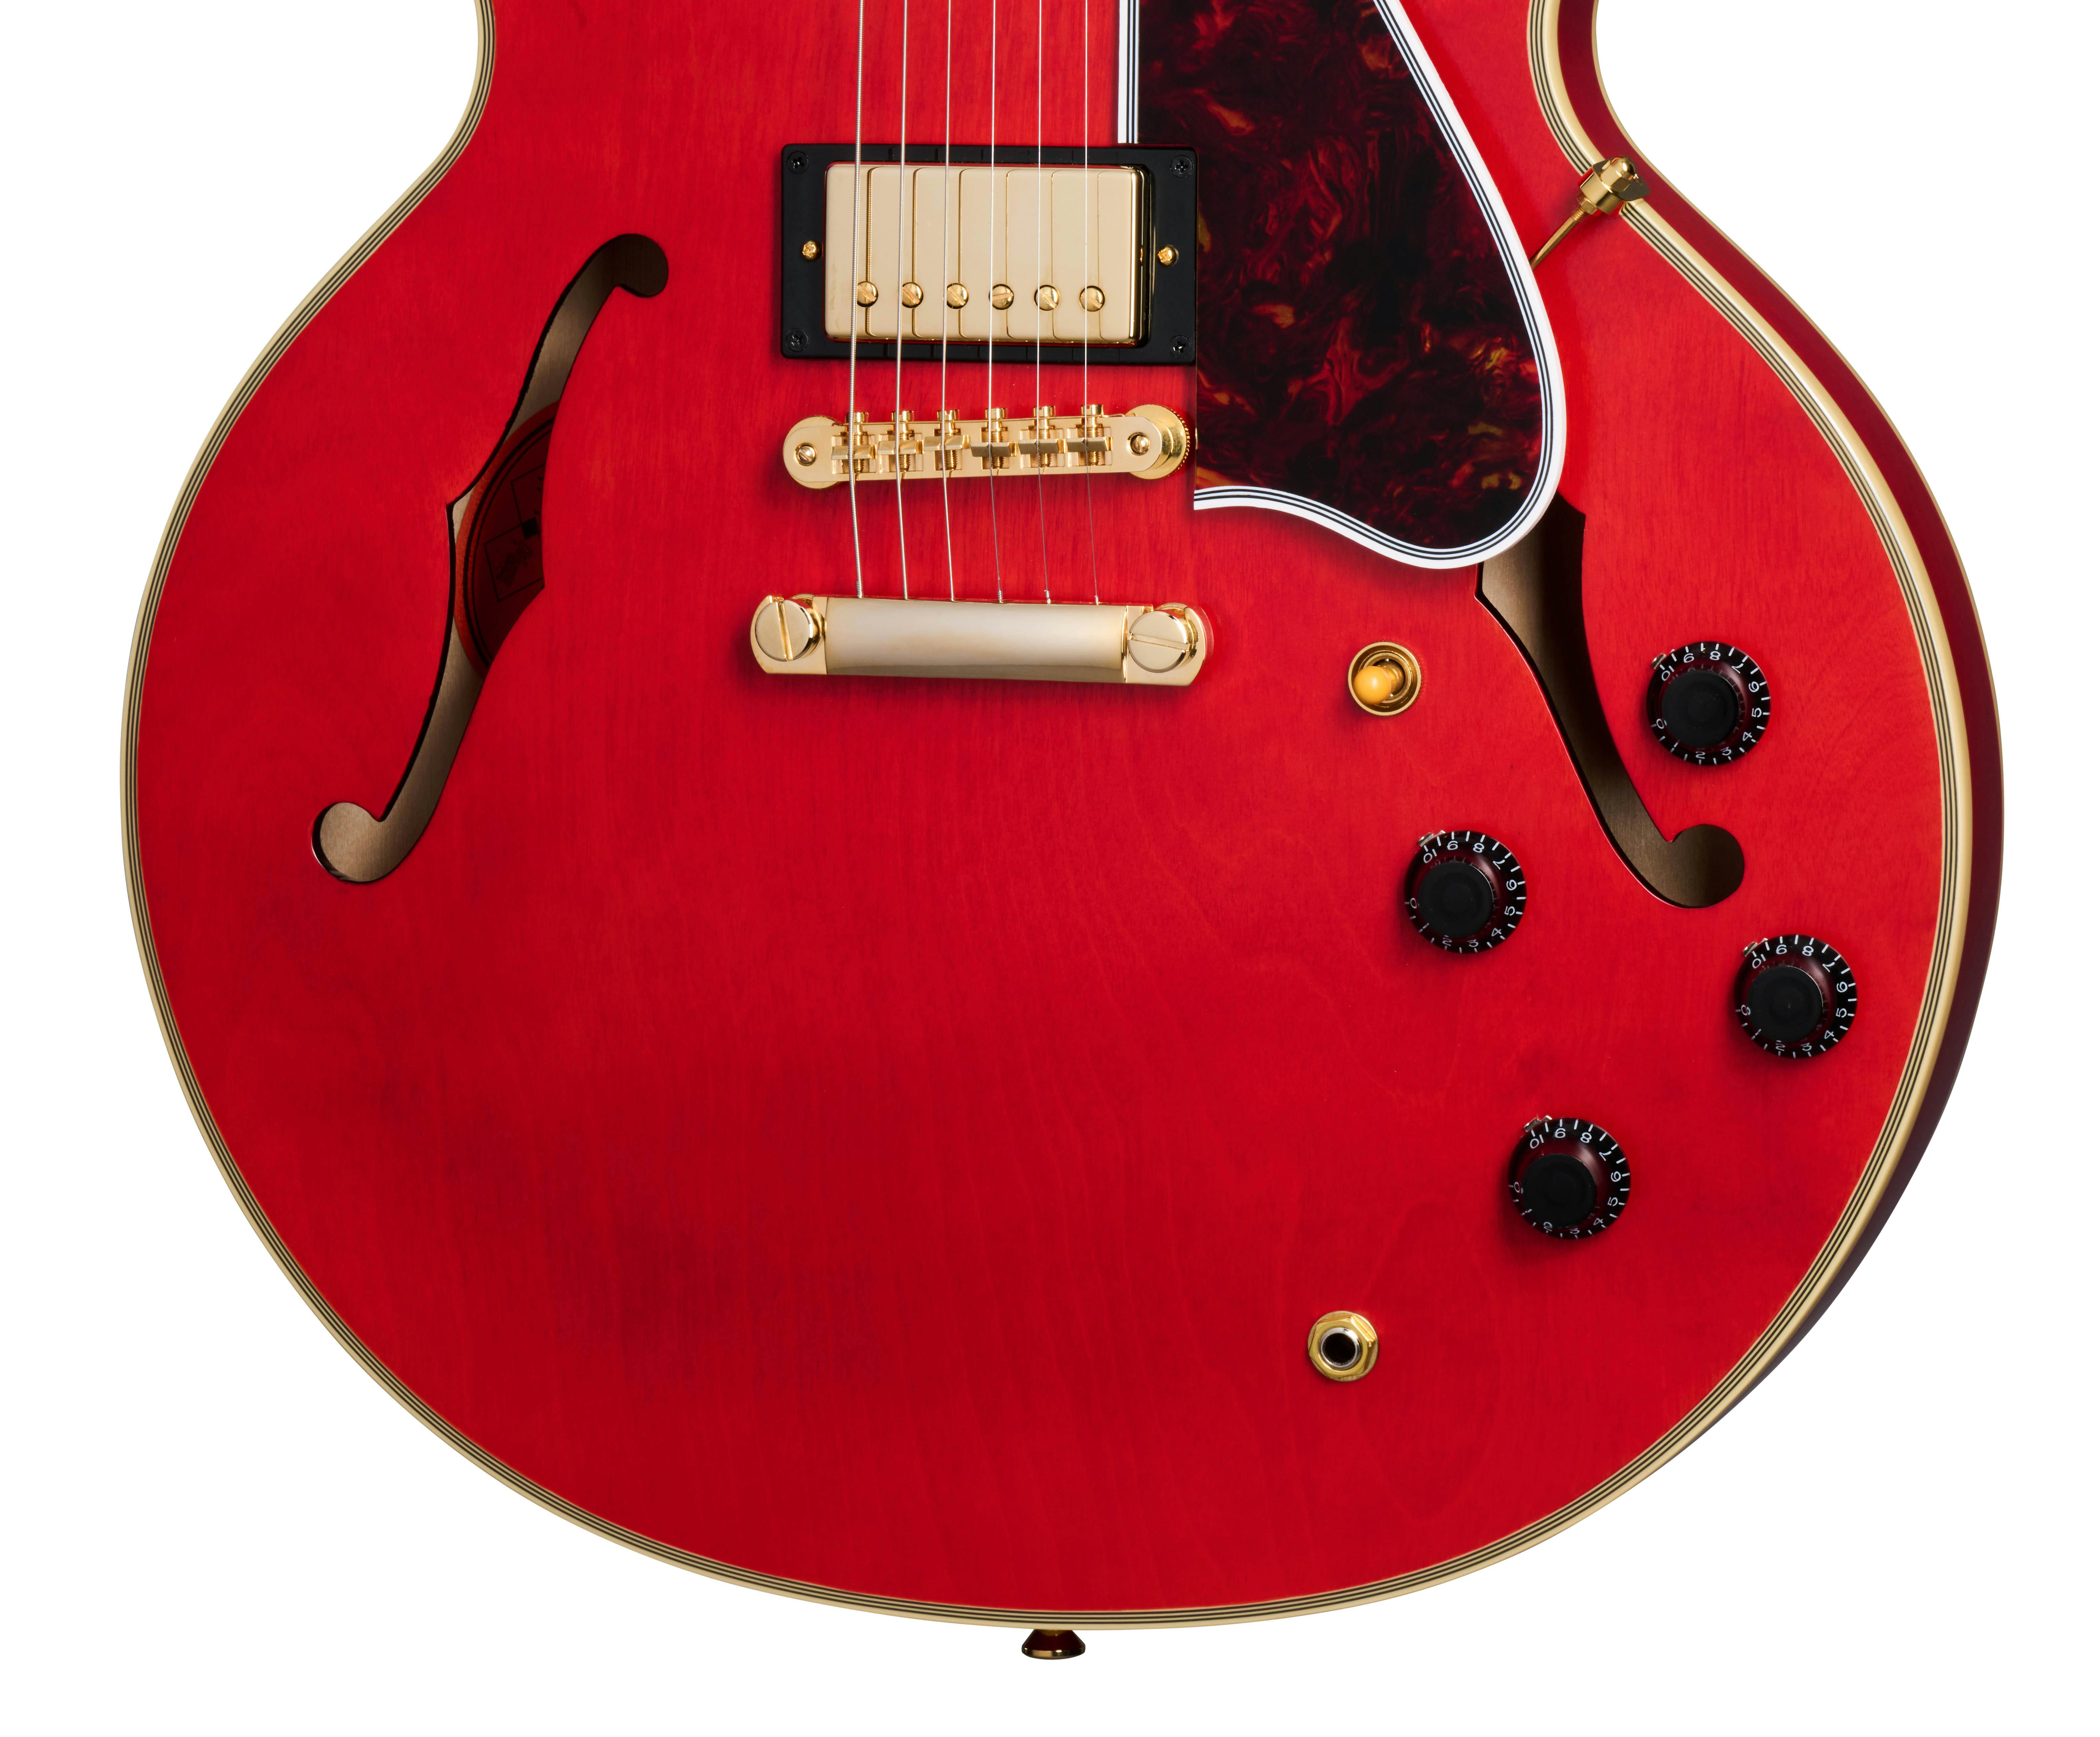 Epiphone 1959 ES-355 in Cherry Red - Andertons Music Co.